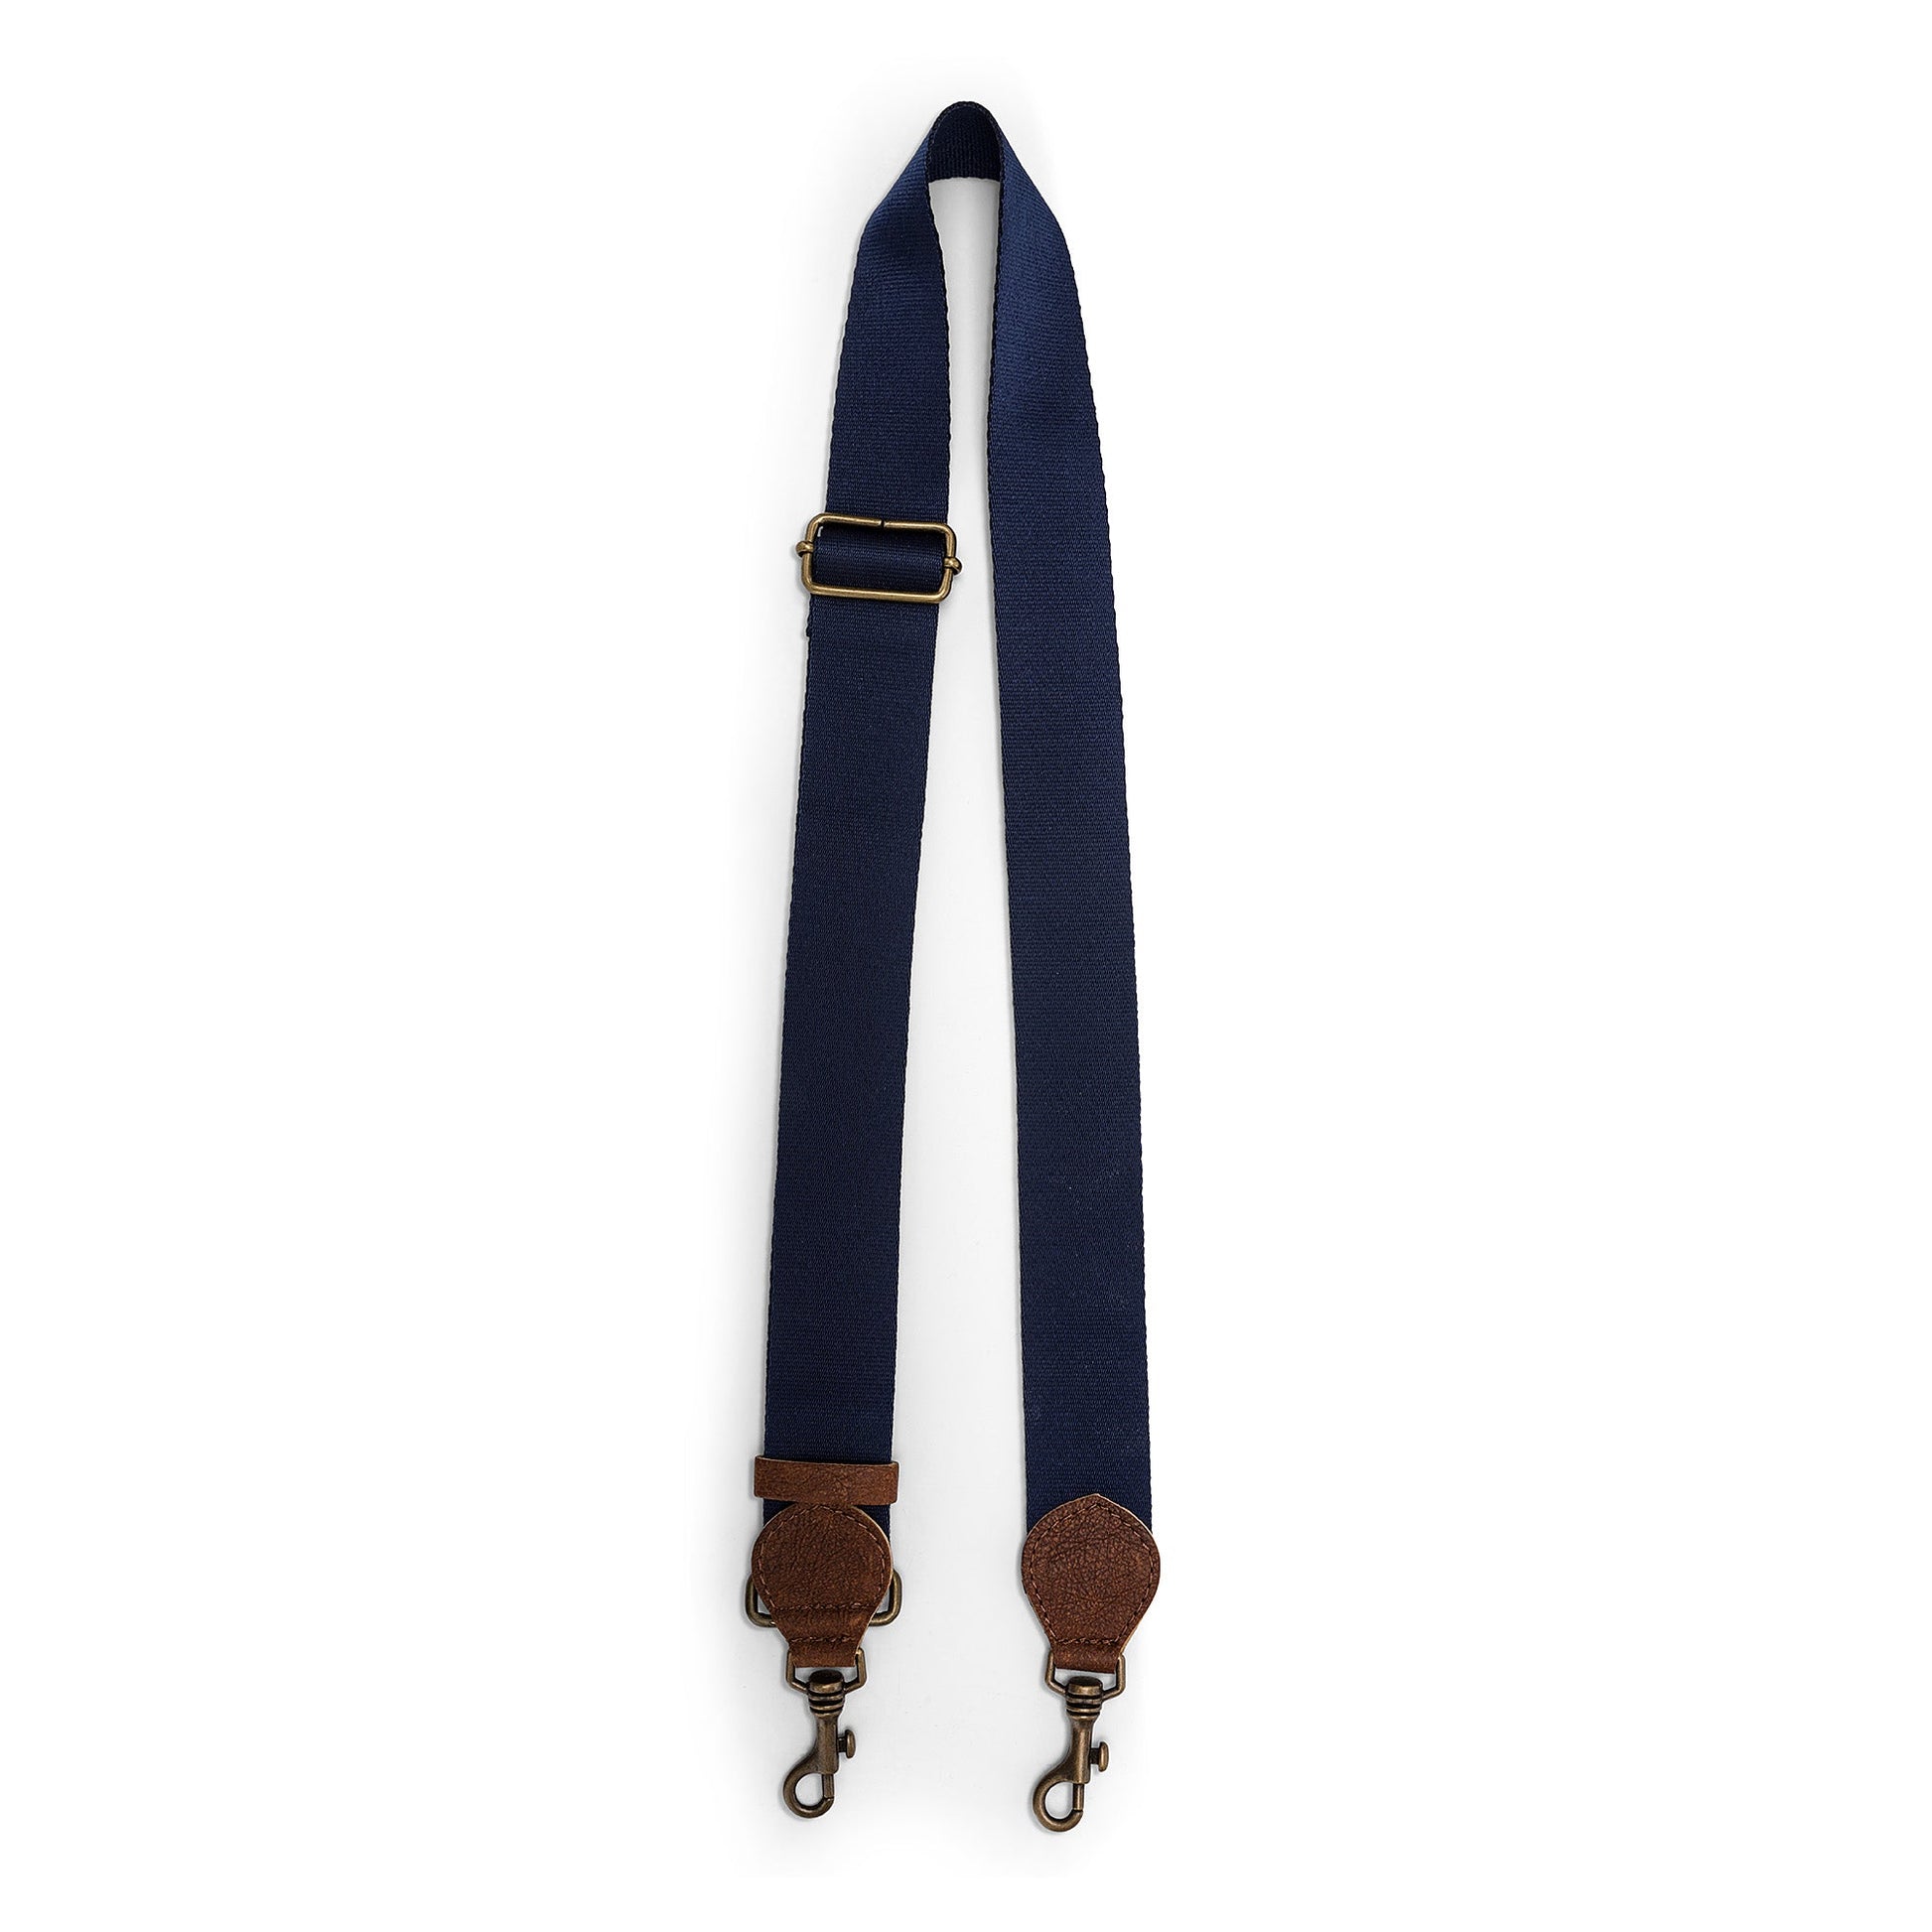 A navy bag strap is shown. The strap shows a brass adjuster, washable paper details and metal retractable fasteners.